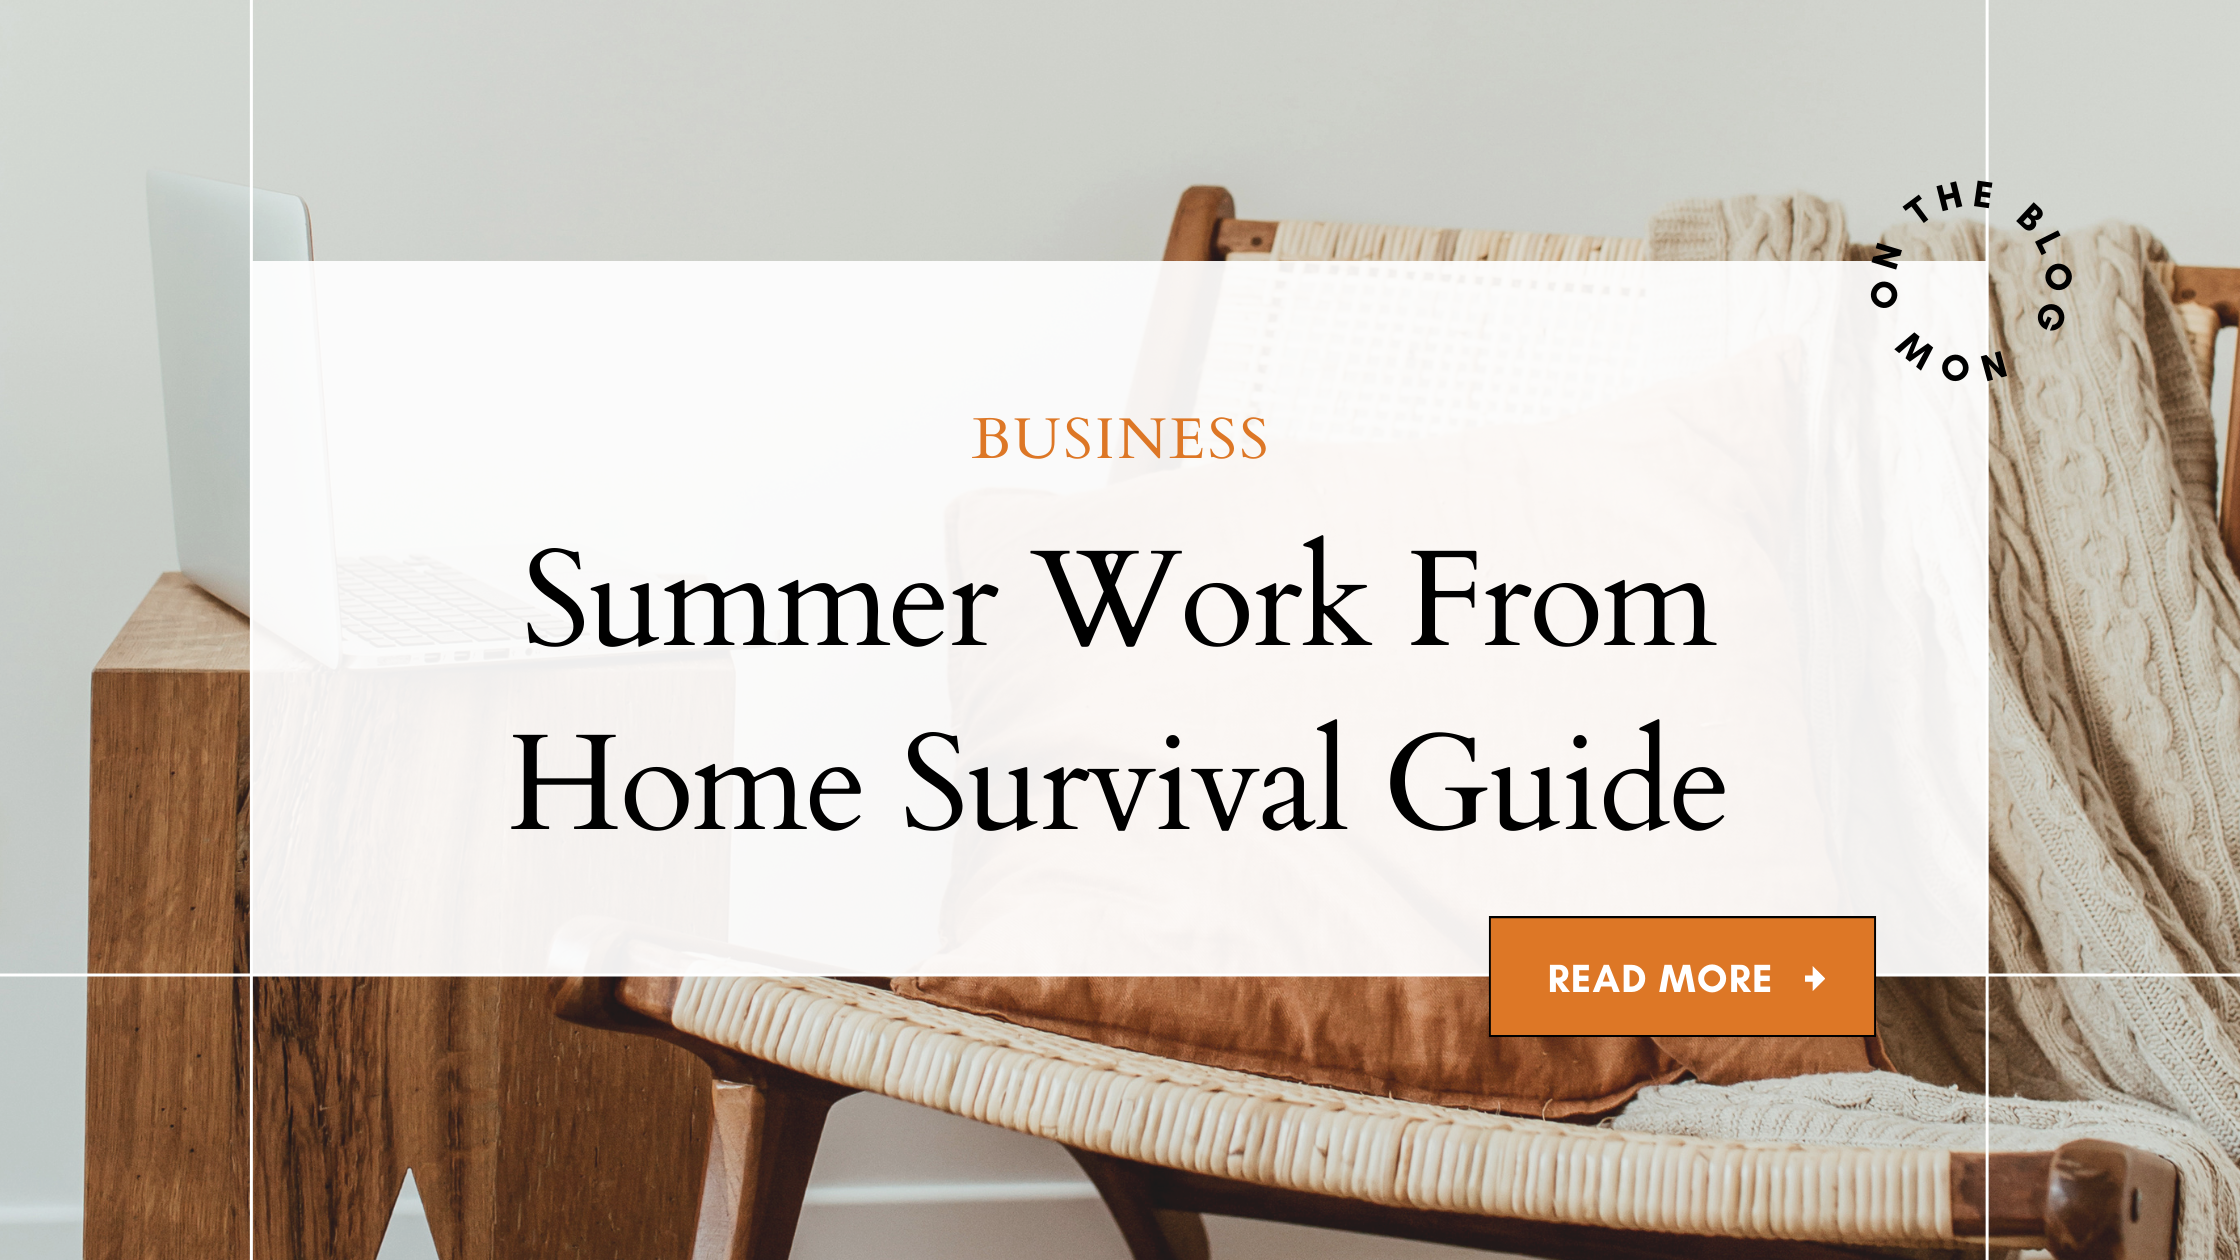 Tips for Working From Home Over the Summer